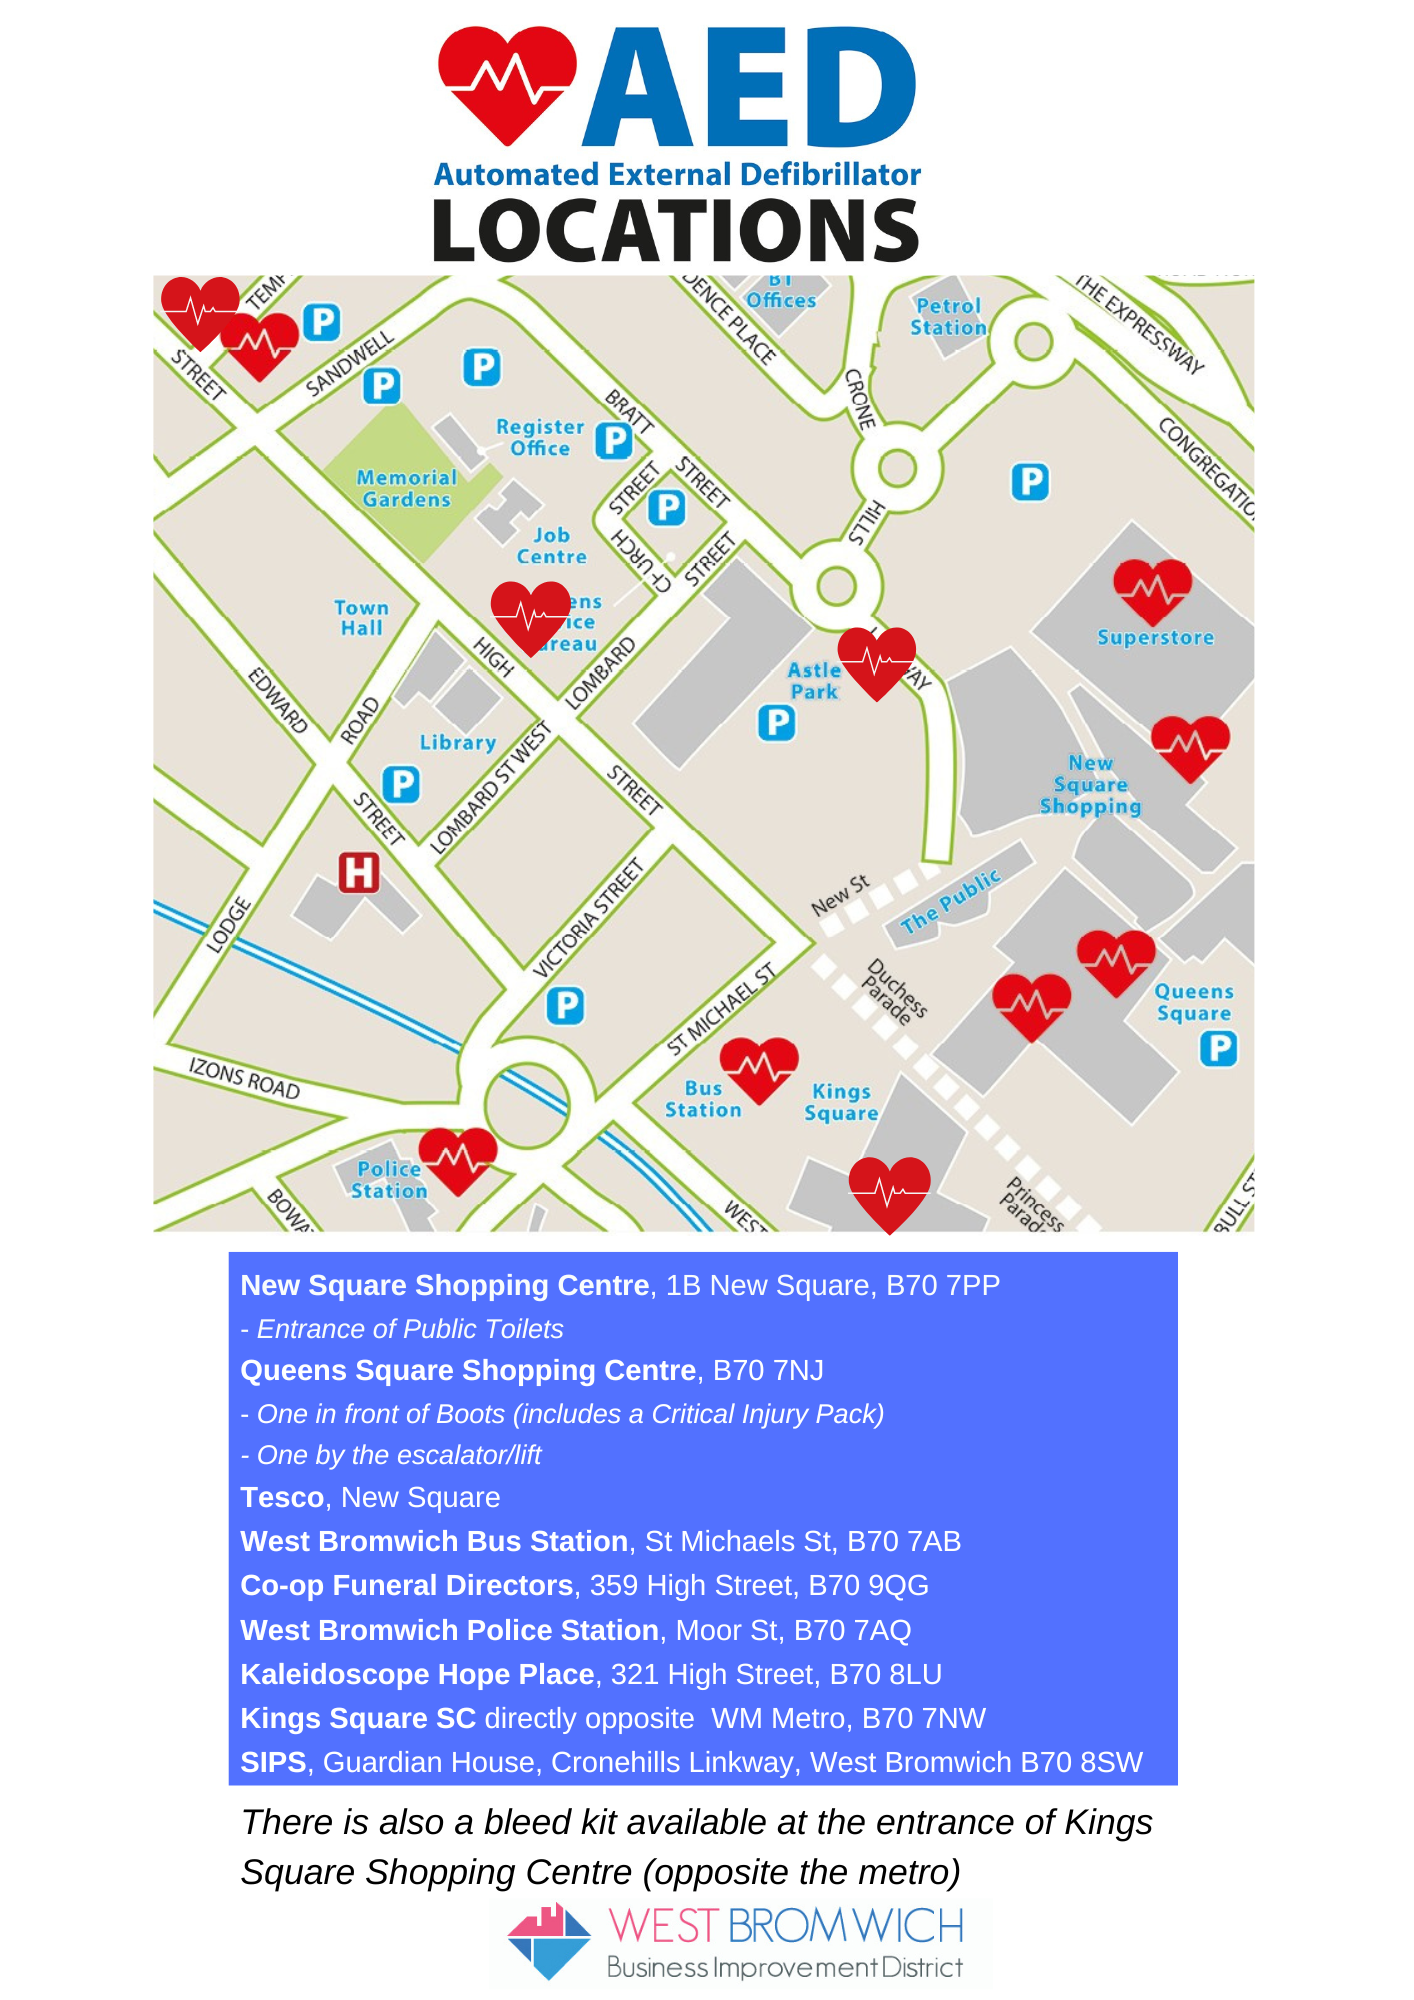 Automated External Defibrillator locations in West Bromwich BID area.